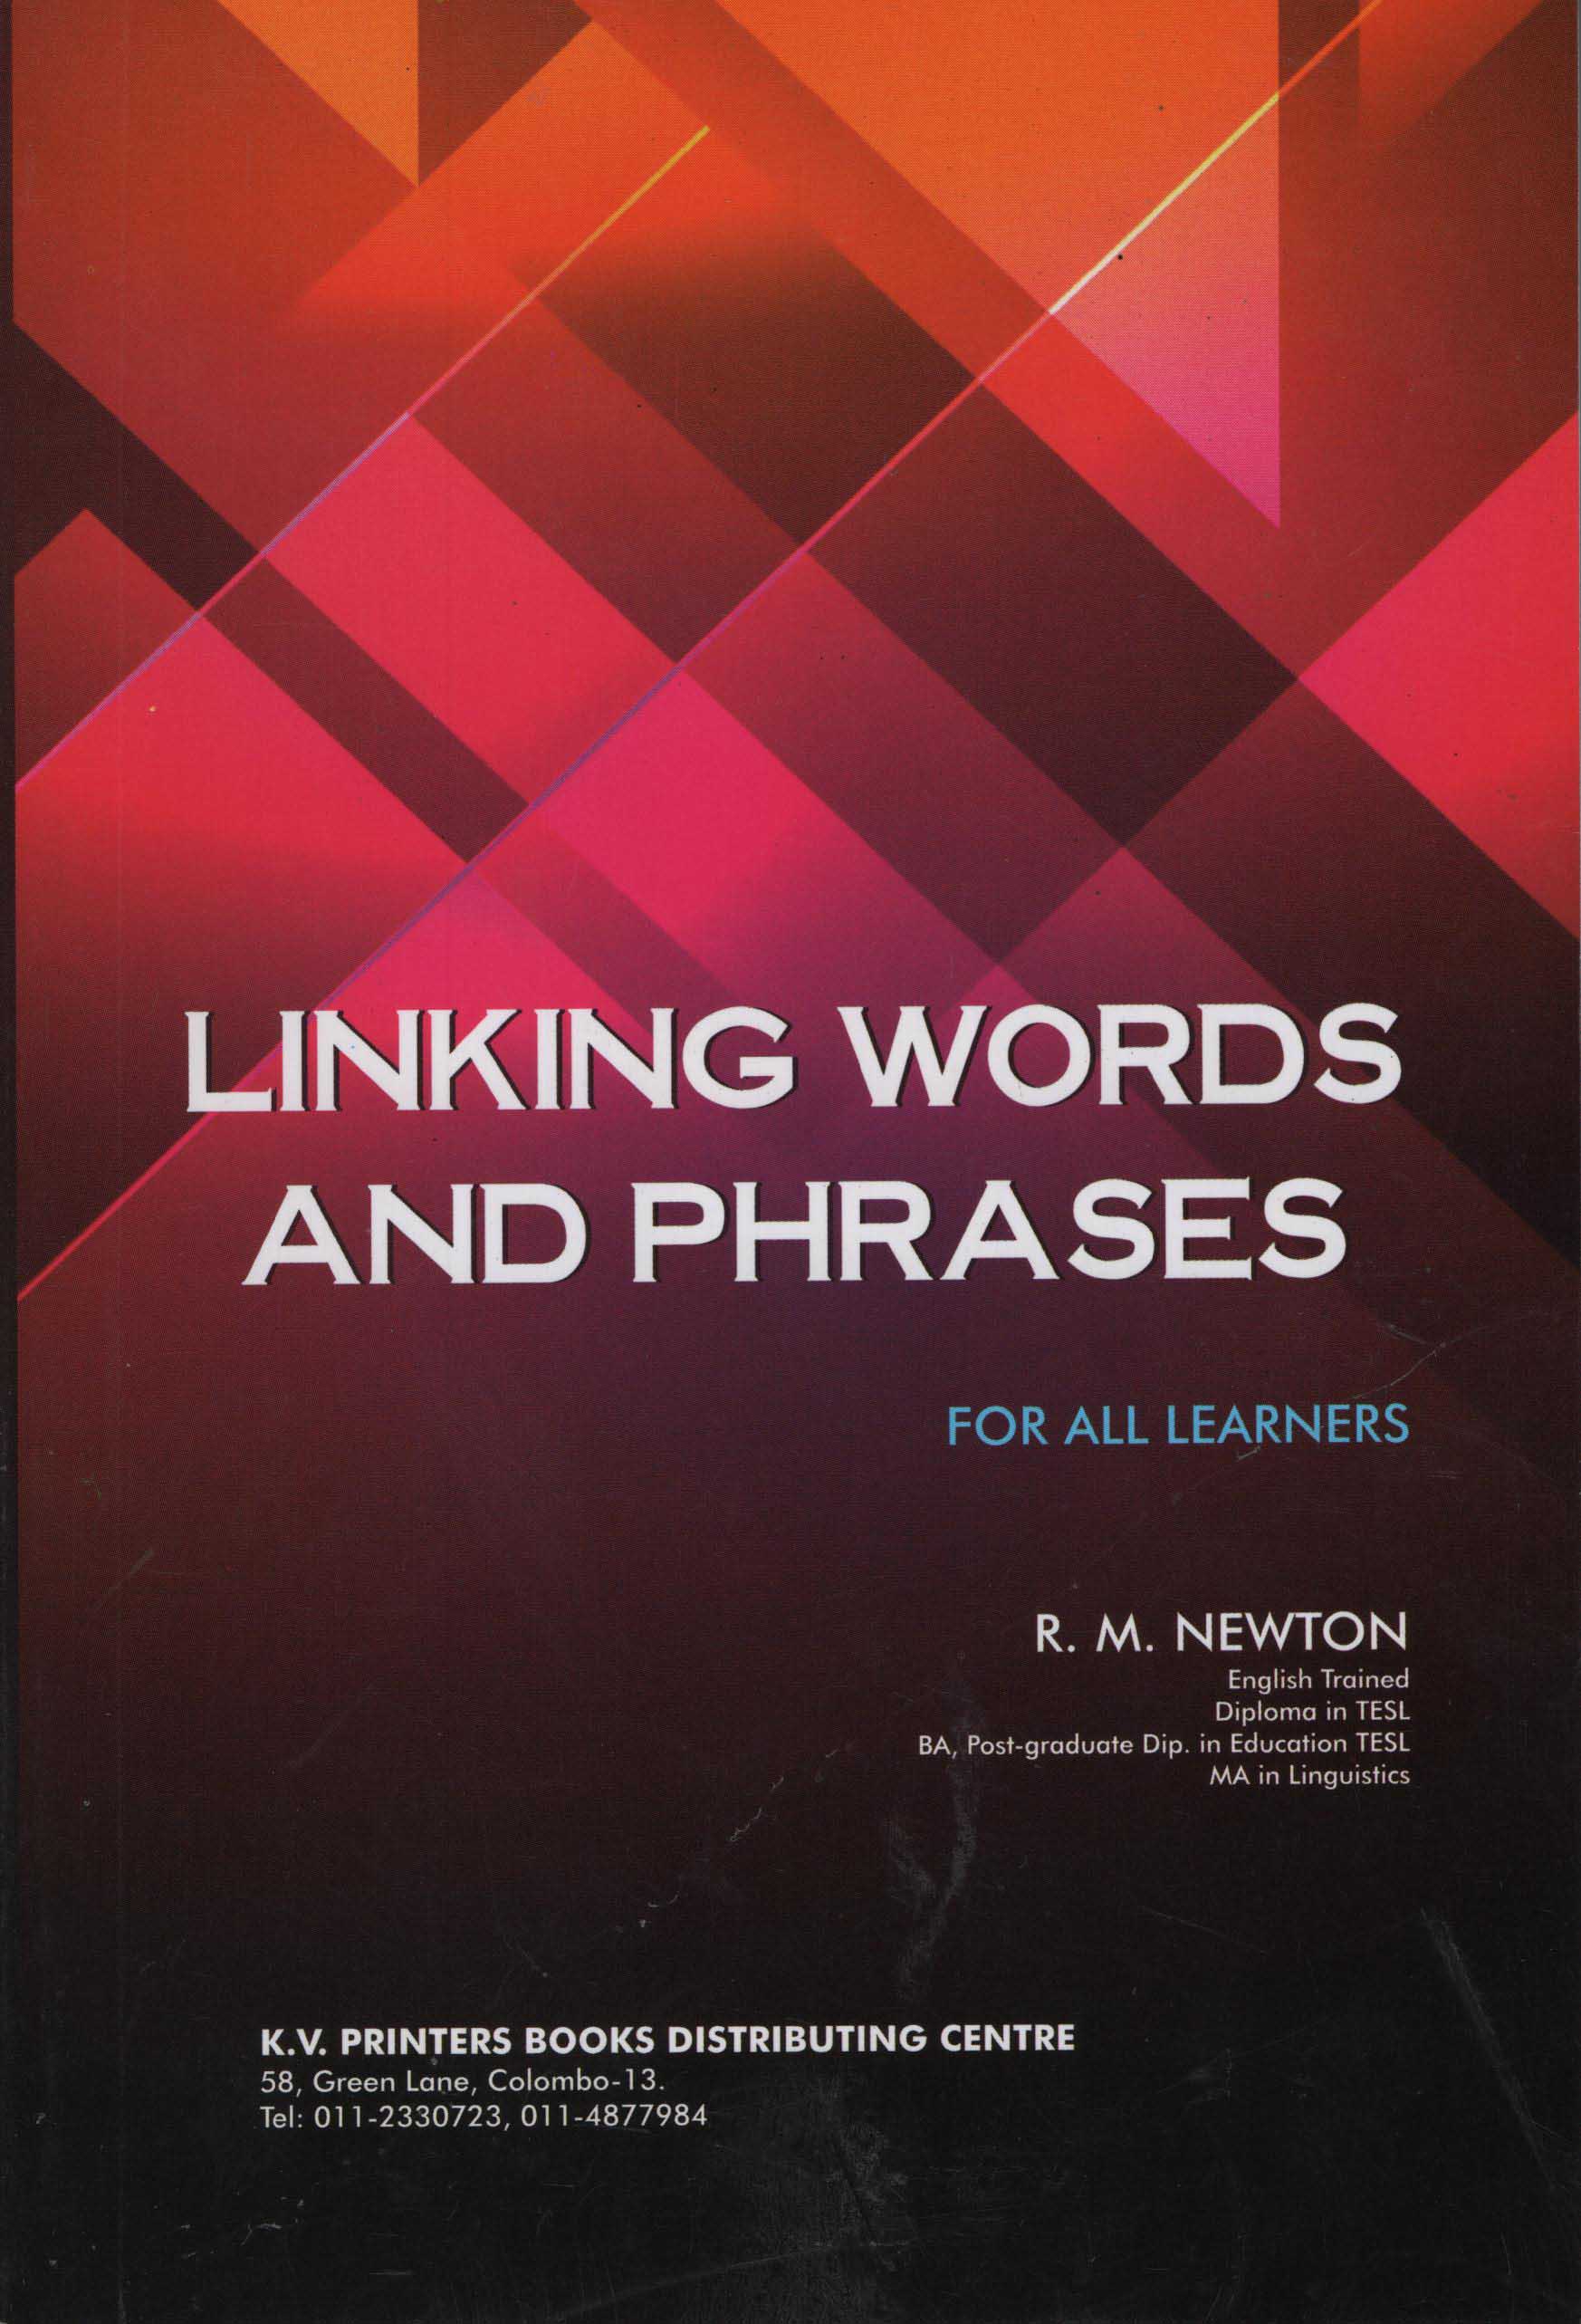 Linking Words and Phrases for All Learners